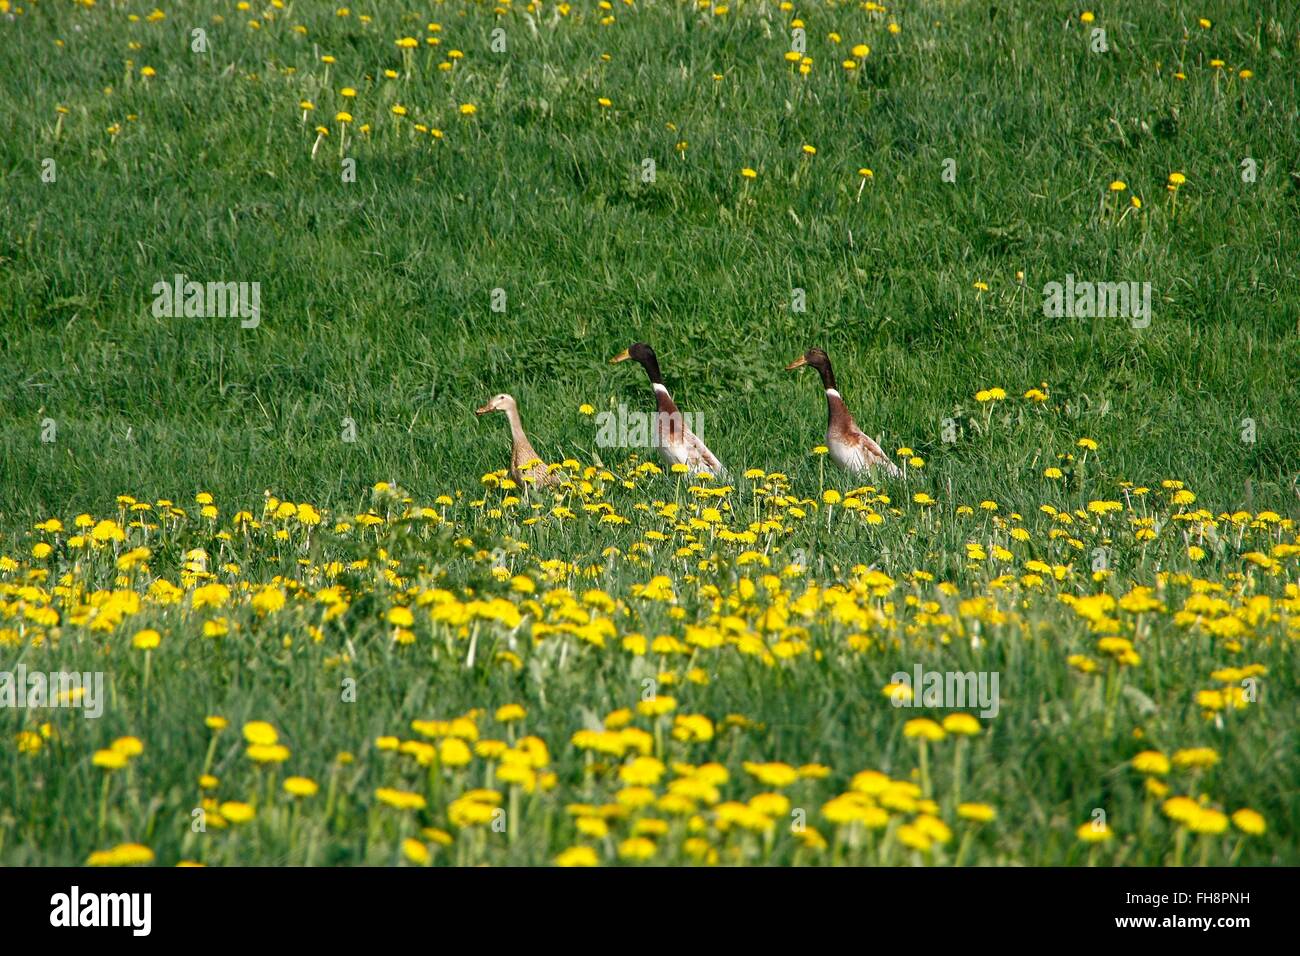 The Indian Runner Duck is also called bottles duck. It is a derivation of the ducks breed of Mallard (Anas platyrhynchos). Neidhartshausen, Rhoen, Thuringia, Germany, Europa Photo: May 1, 2012 Stock Photo